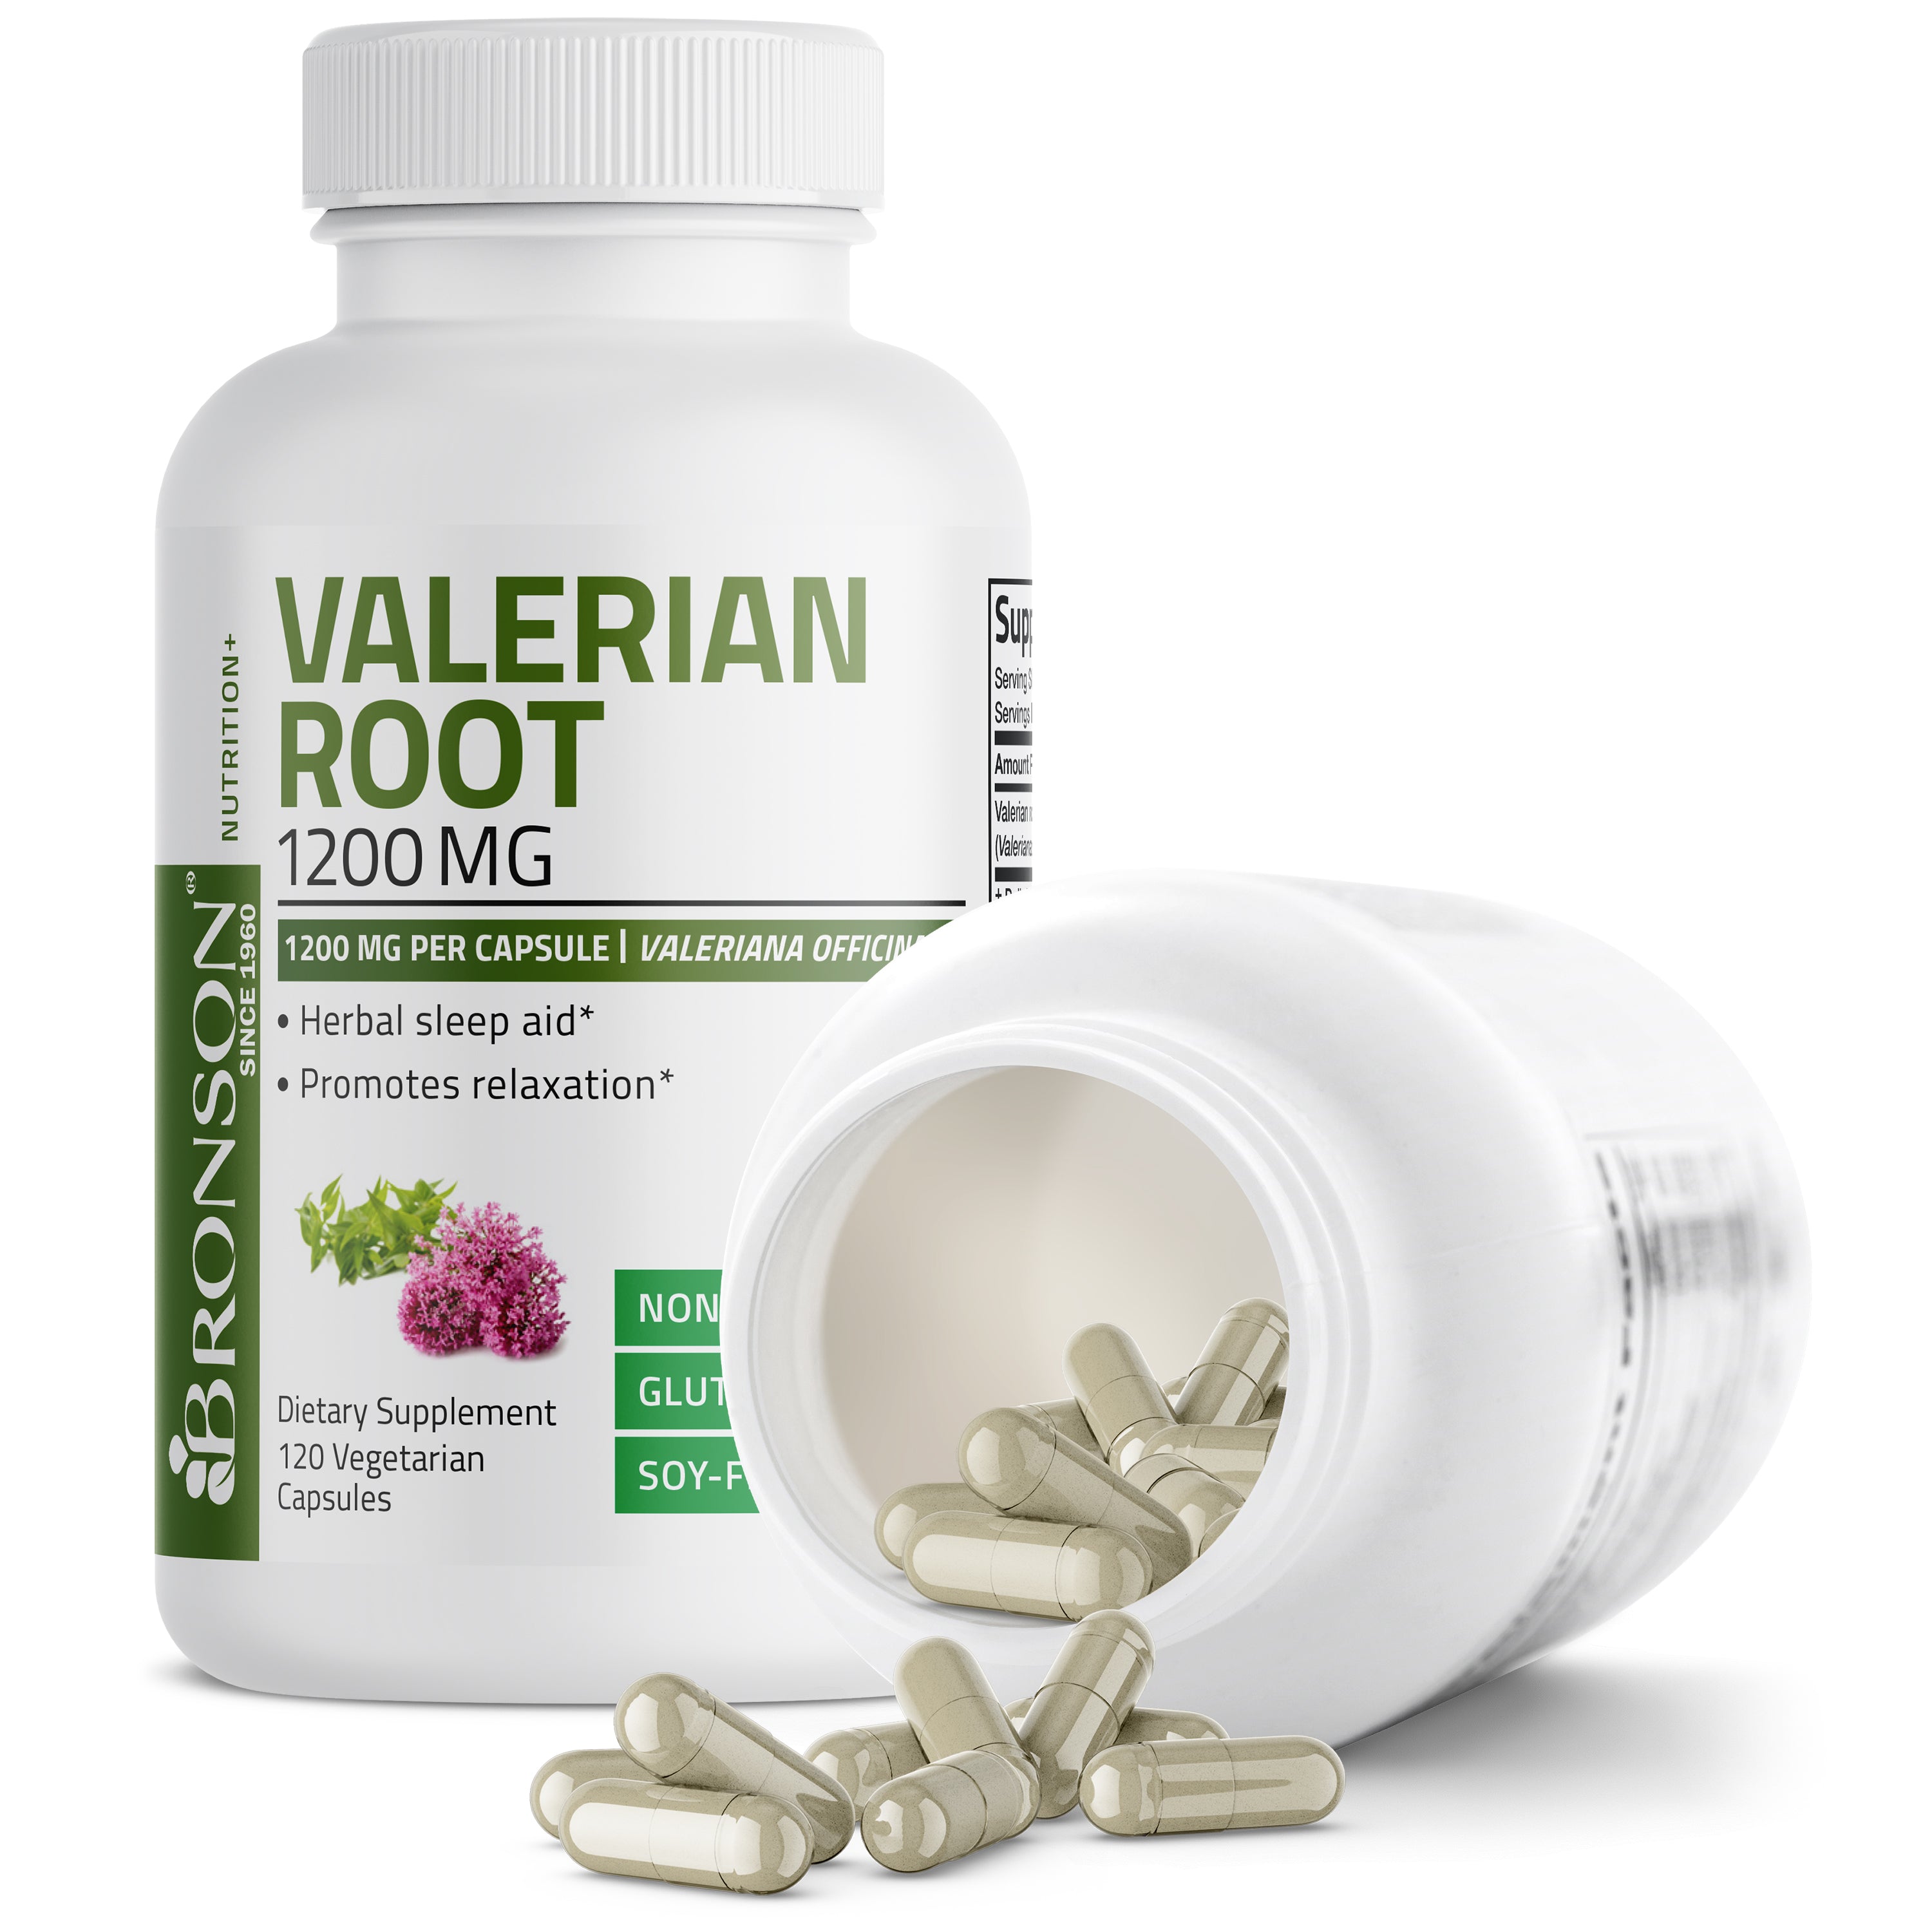 Valerian Root 1200 mg view 5 of 6